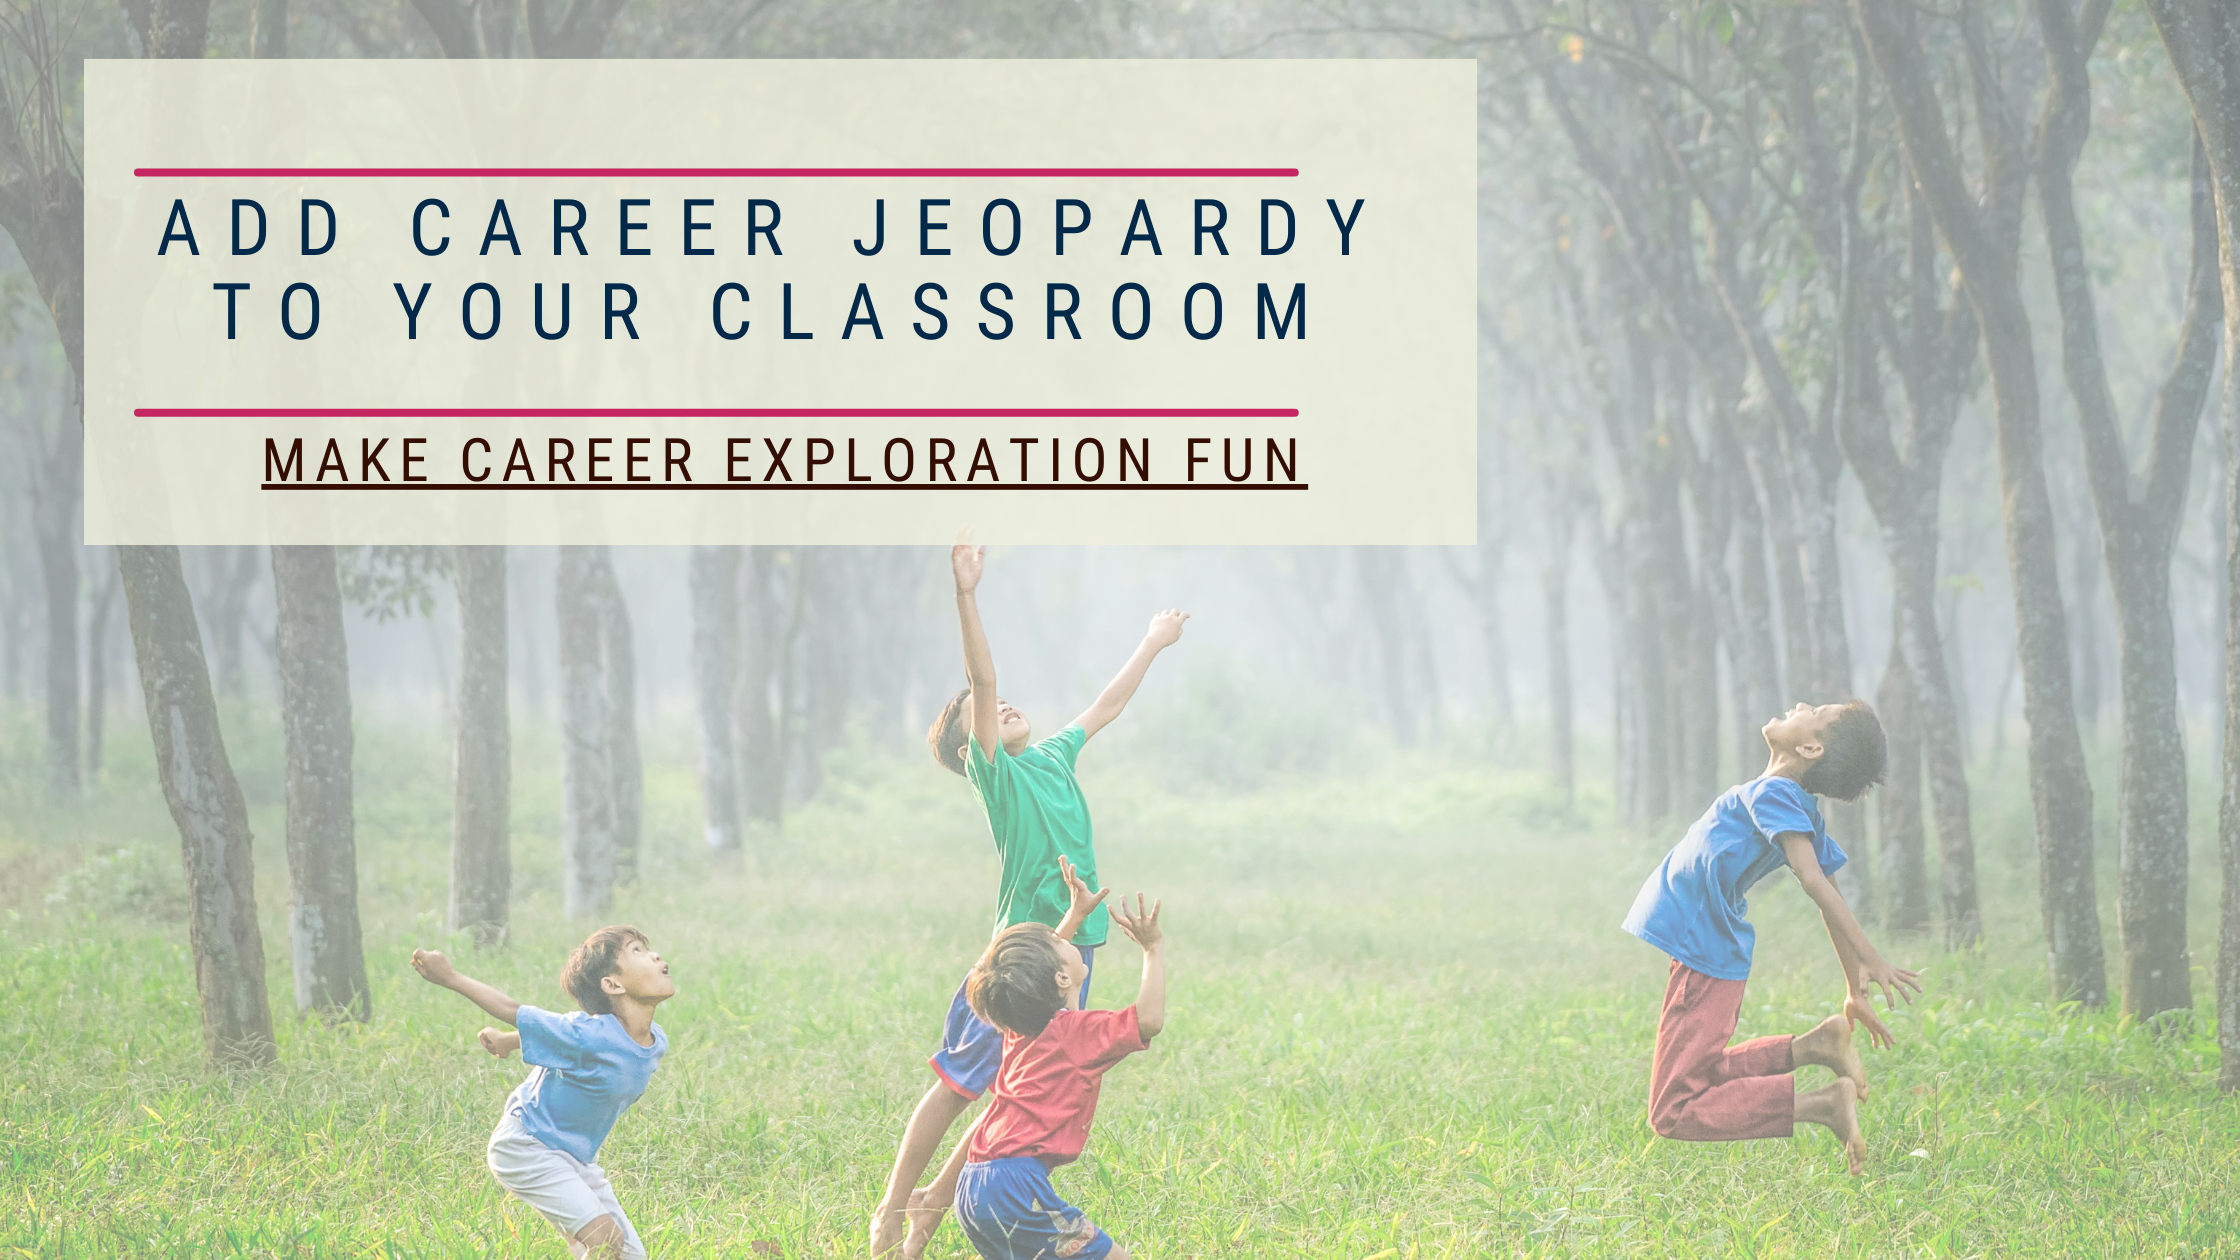 Make Career Exploration Fun: Add Career Jeopardy to Your Classroom